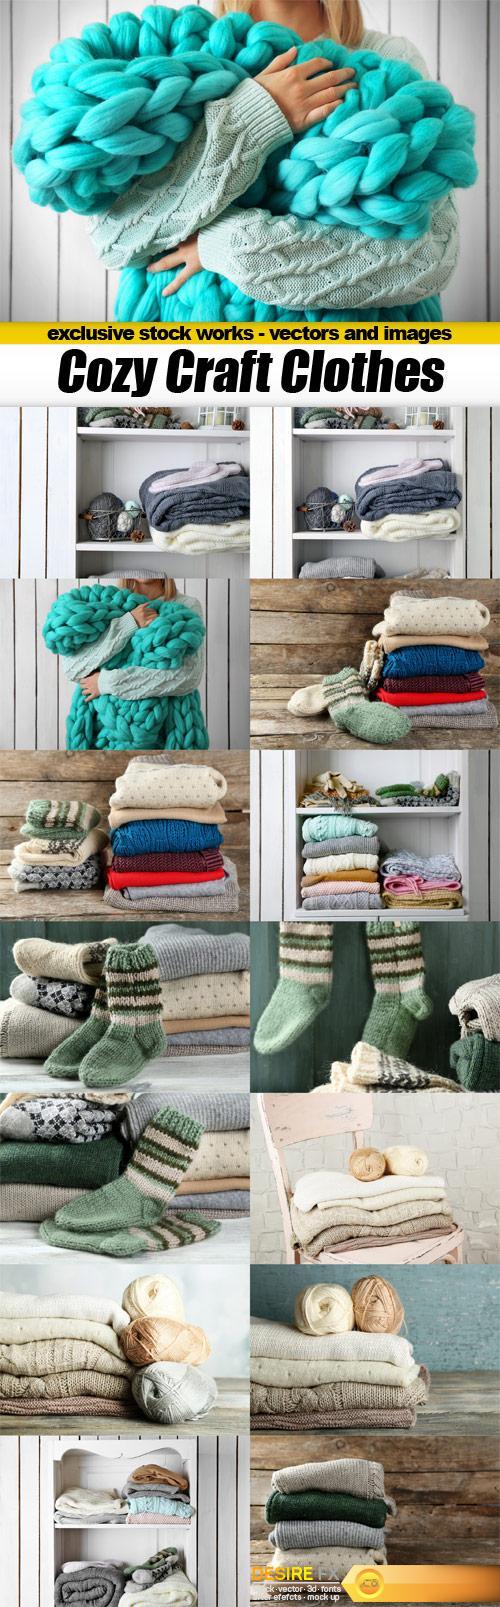 Cozy Craft Clothes - 15x JPEGs